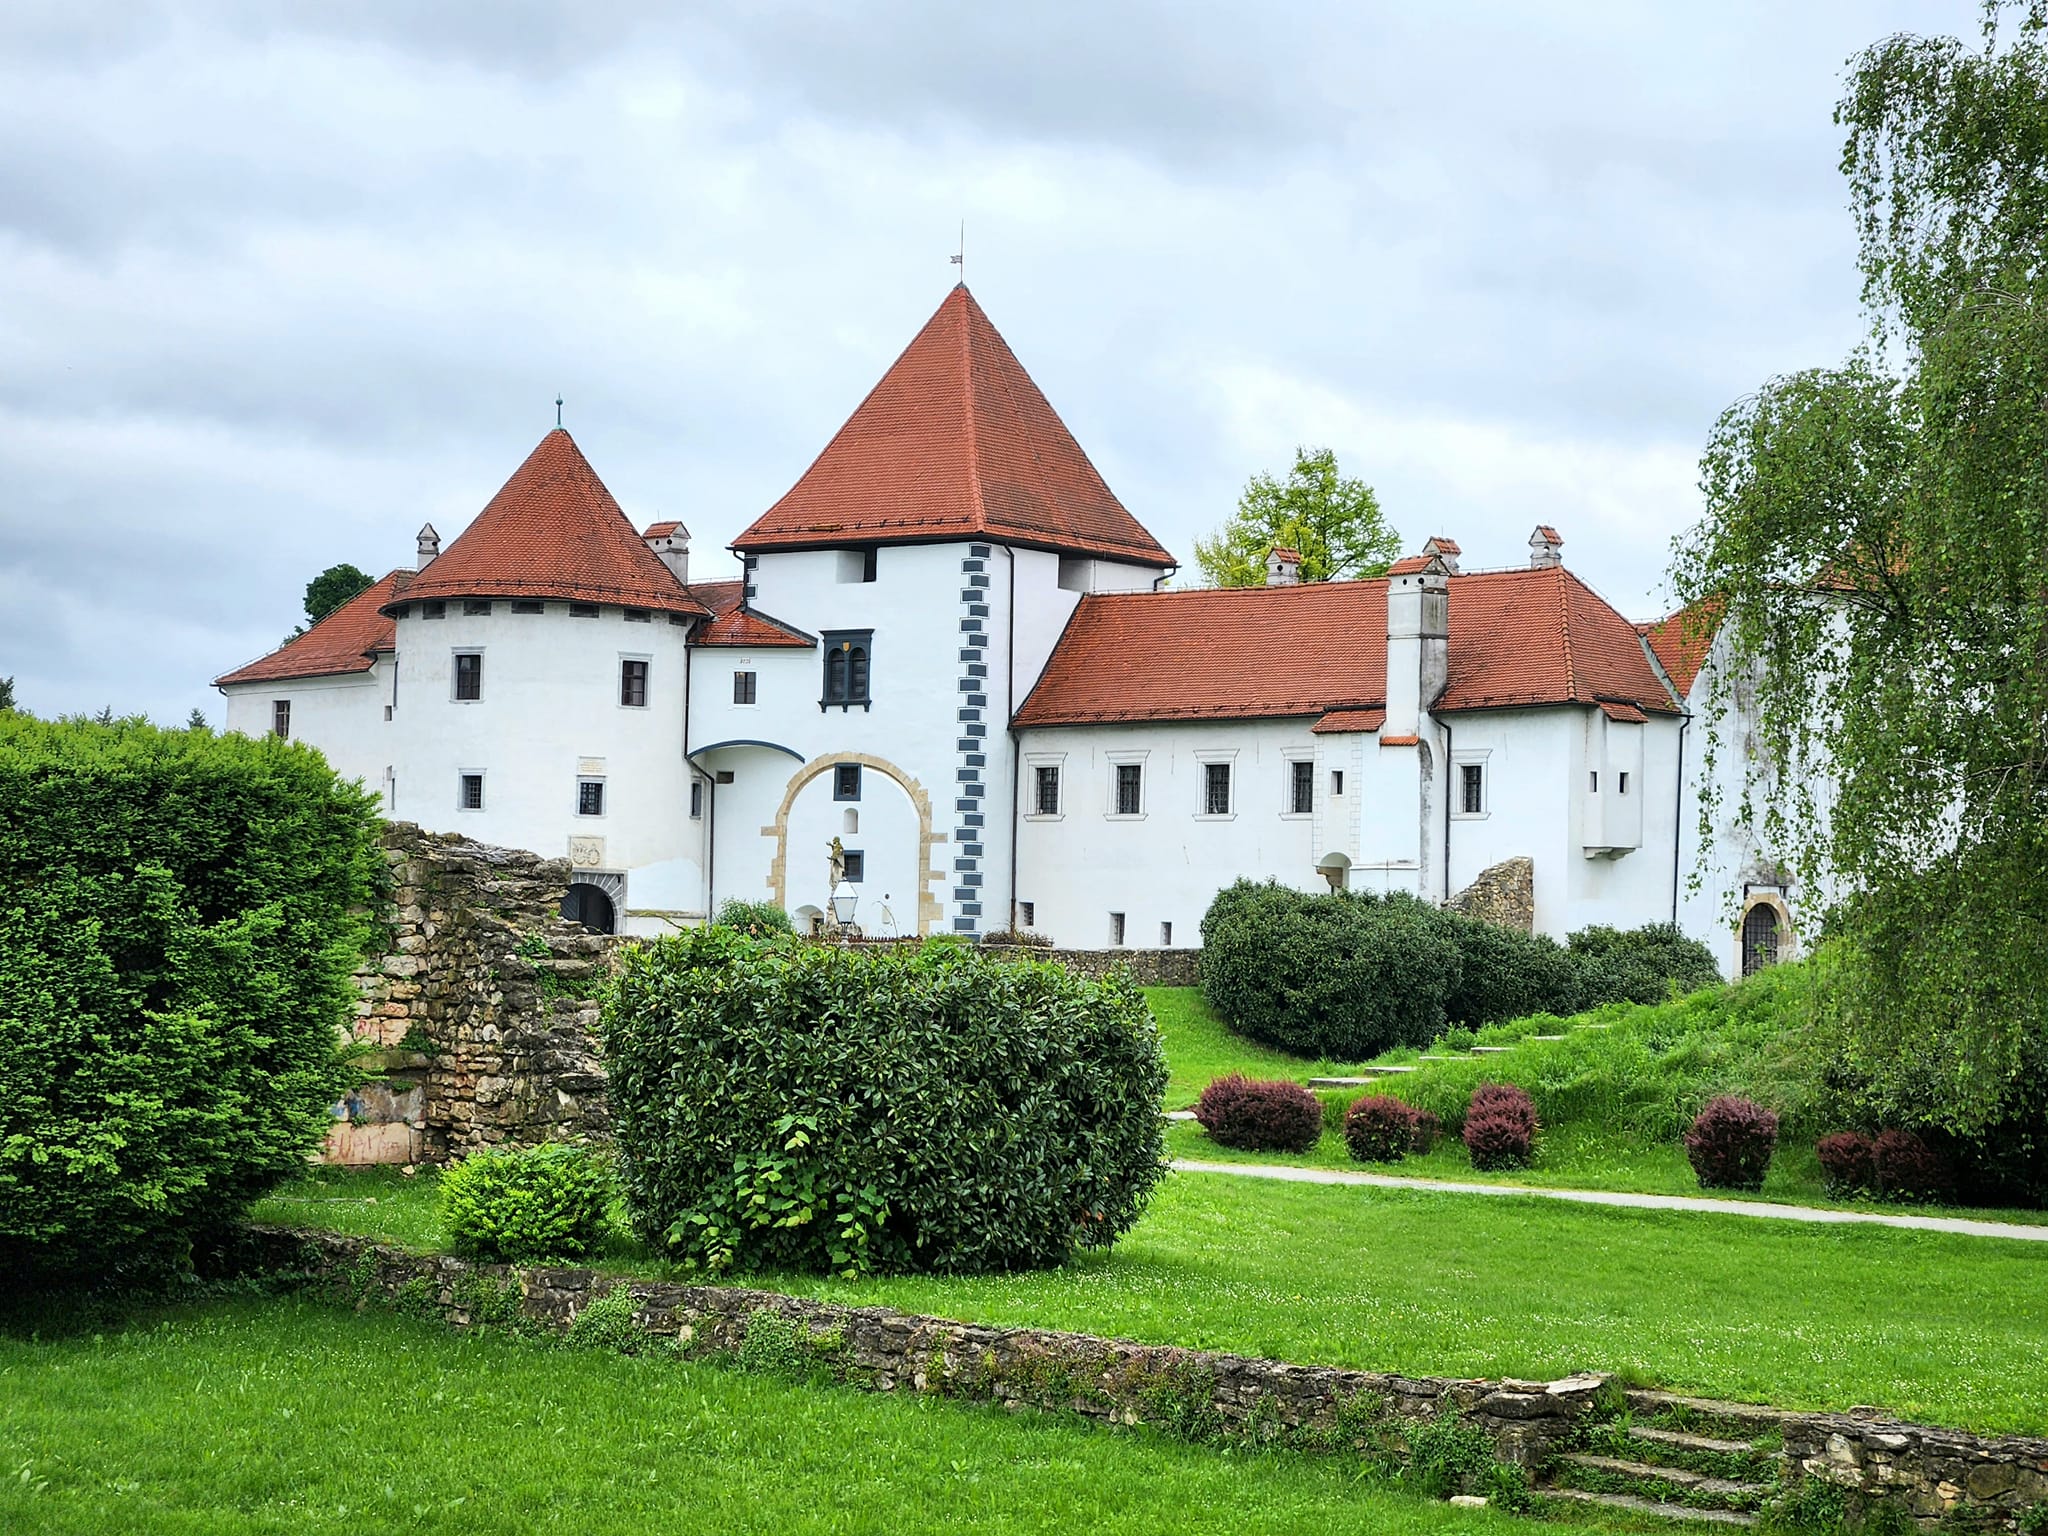 Tripmasters and Other Travel Professionals Invited to Croatia and Italy (Part 3 of 6: Varaždinske Toplice and Varaždin)